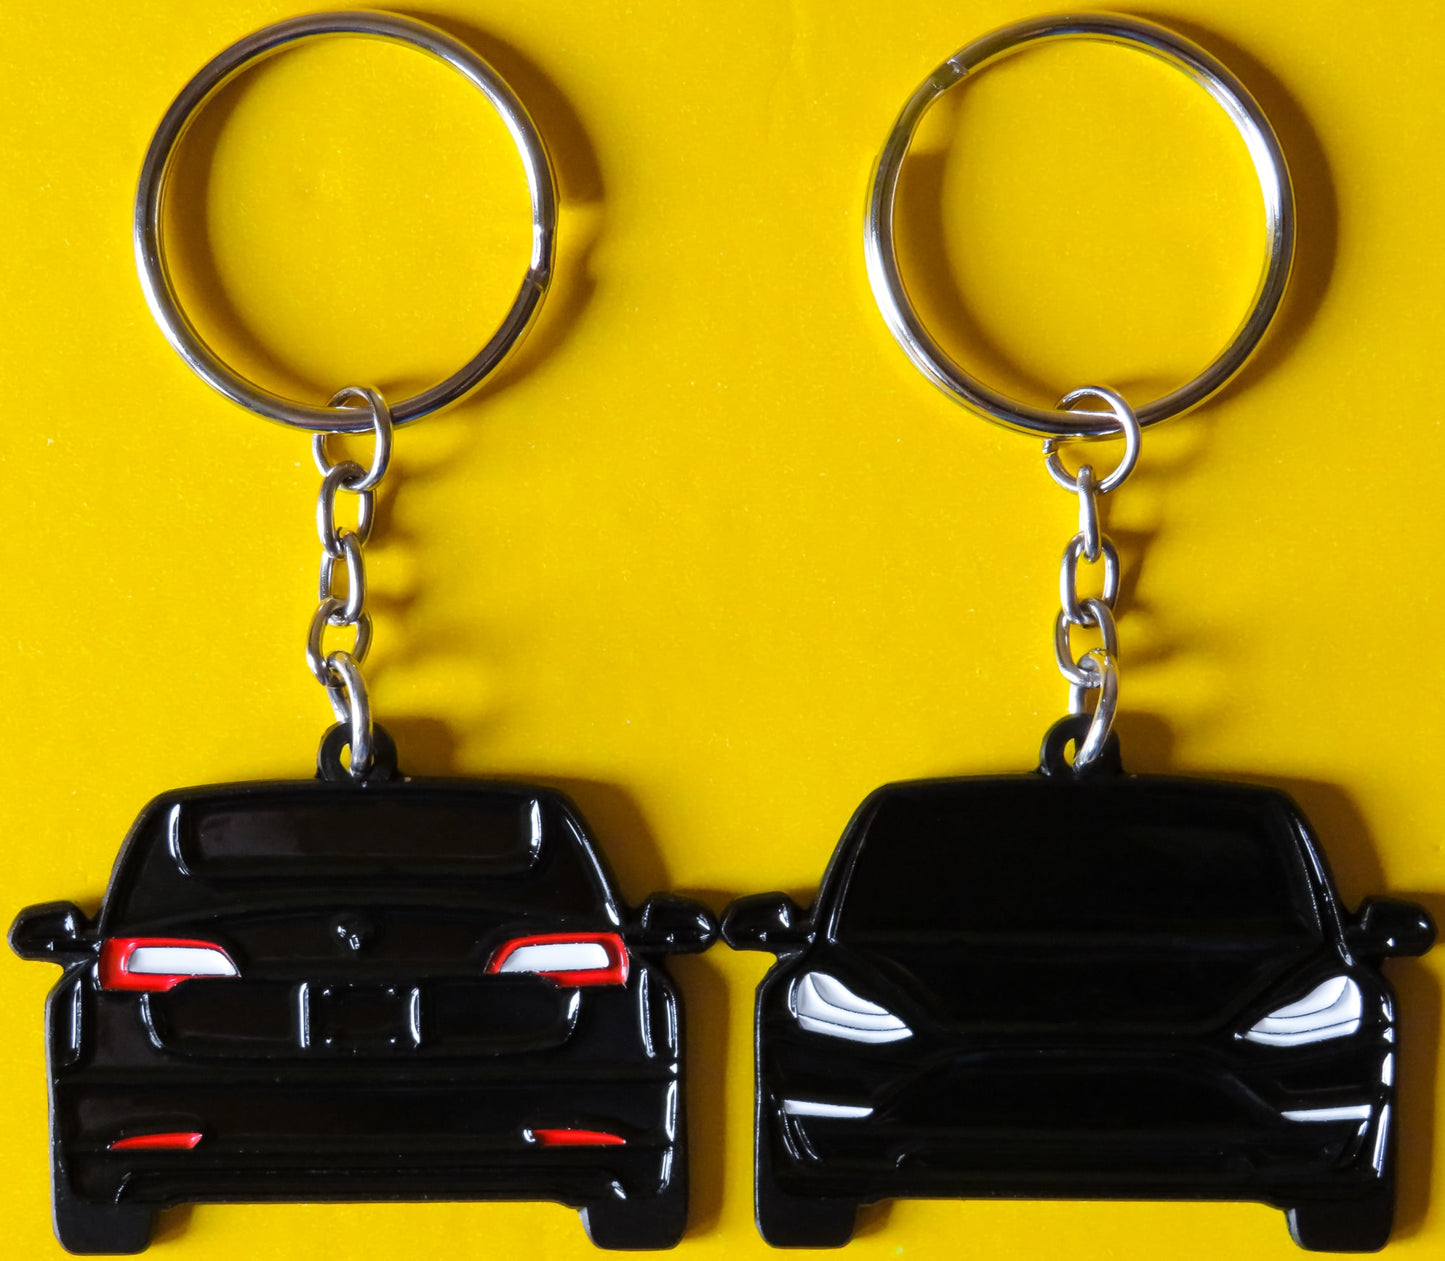 Enamel Keychain Pin Patch Lanyard that fits on a key fob cover for Tesla Model 3. A great accessory for EV owners and enthusiasts along with accessories, jet tag, key ring gift ideas for car guys, car enthusiasts, gearheads, father, mother, dad, mom, him, her, boyfriend, girlfriend and more.